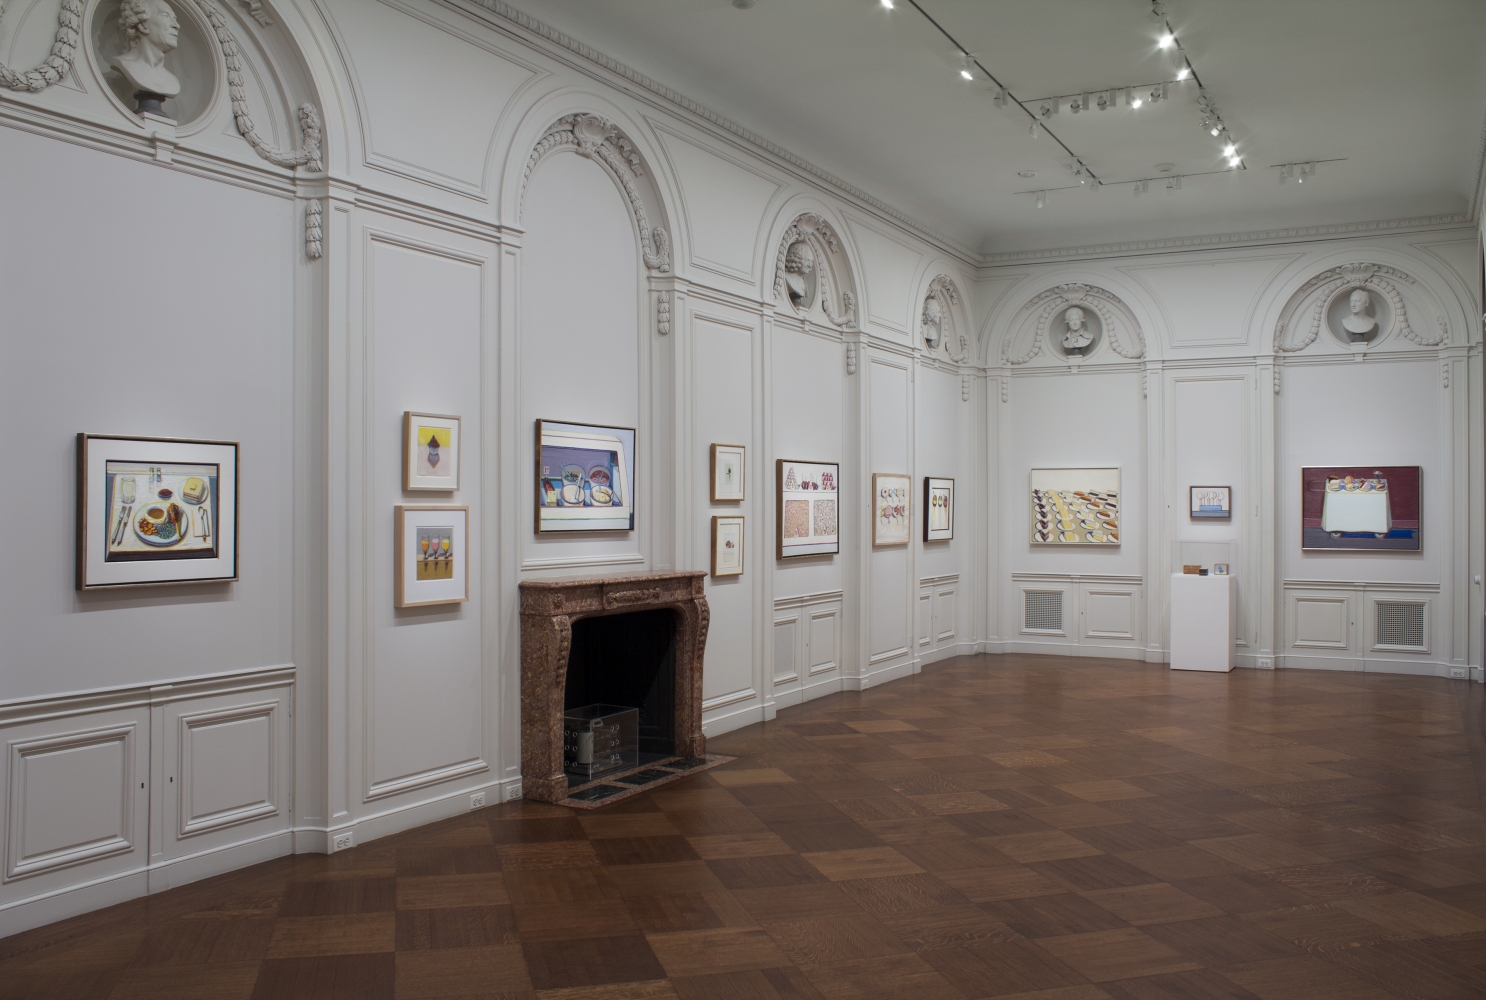 Installation view of&nbsp;Wayne Thiebaud: A Retrospective,&nbsp;October 22&ndash;November 29, 2012.&nbsp;Left to Right:&nbsp;Drumstick Dinner, 2012;&nbsp;Cupcake and Shadow, 1995-2012;&nbsp;Drink Syrups, 1964, Lent by Private Collection;&nbsp;Food Bowls, 1992-2005, Lent by Wayne and Betty Jean Thiebaud;&nbsp;Two Flavors, 2003, Lent by Betty Jean Thiebaud;&nbsp;Two Donuts, 2003;&nbsp;Peppermint Counter, 1963, Lent by Wayne and Betty Jean Thiebaud;&nbsp;Big Suckers, 1971;&nbsp;Condiment Bowls, undated;&nbsp;Pie Counter, 1963, Lent by Whitney Museum of American Art, New York; purchase with funds from the Larry Aldrich Foundation Fund (64.11);&nbsp;Lollipops, 1962, Lent by Private Collection;&nbsp;Cafe Cart, 2012, Art&nbsp;&copy; Wayne Thiebaud / Licensed by VAGA at ARS, New York.